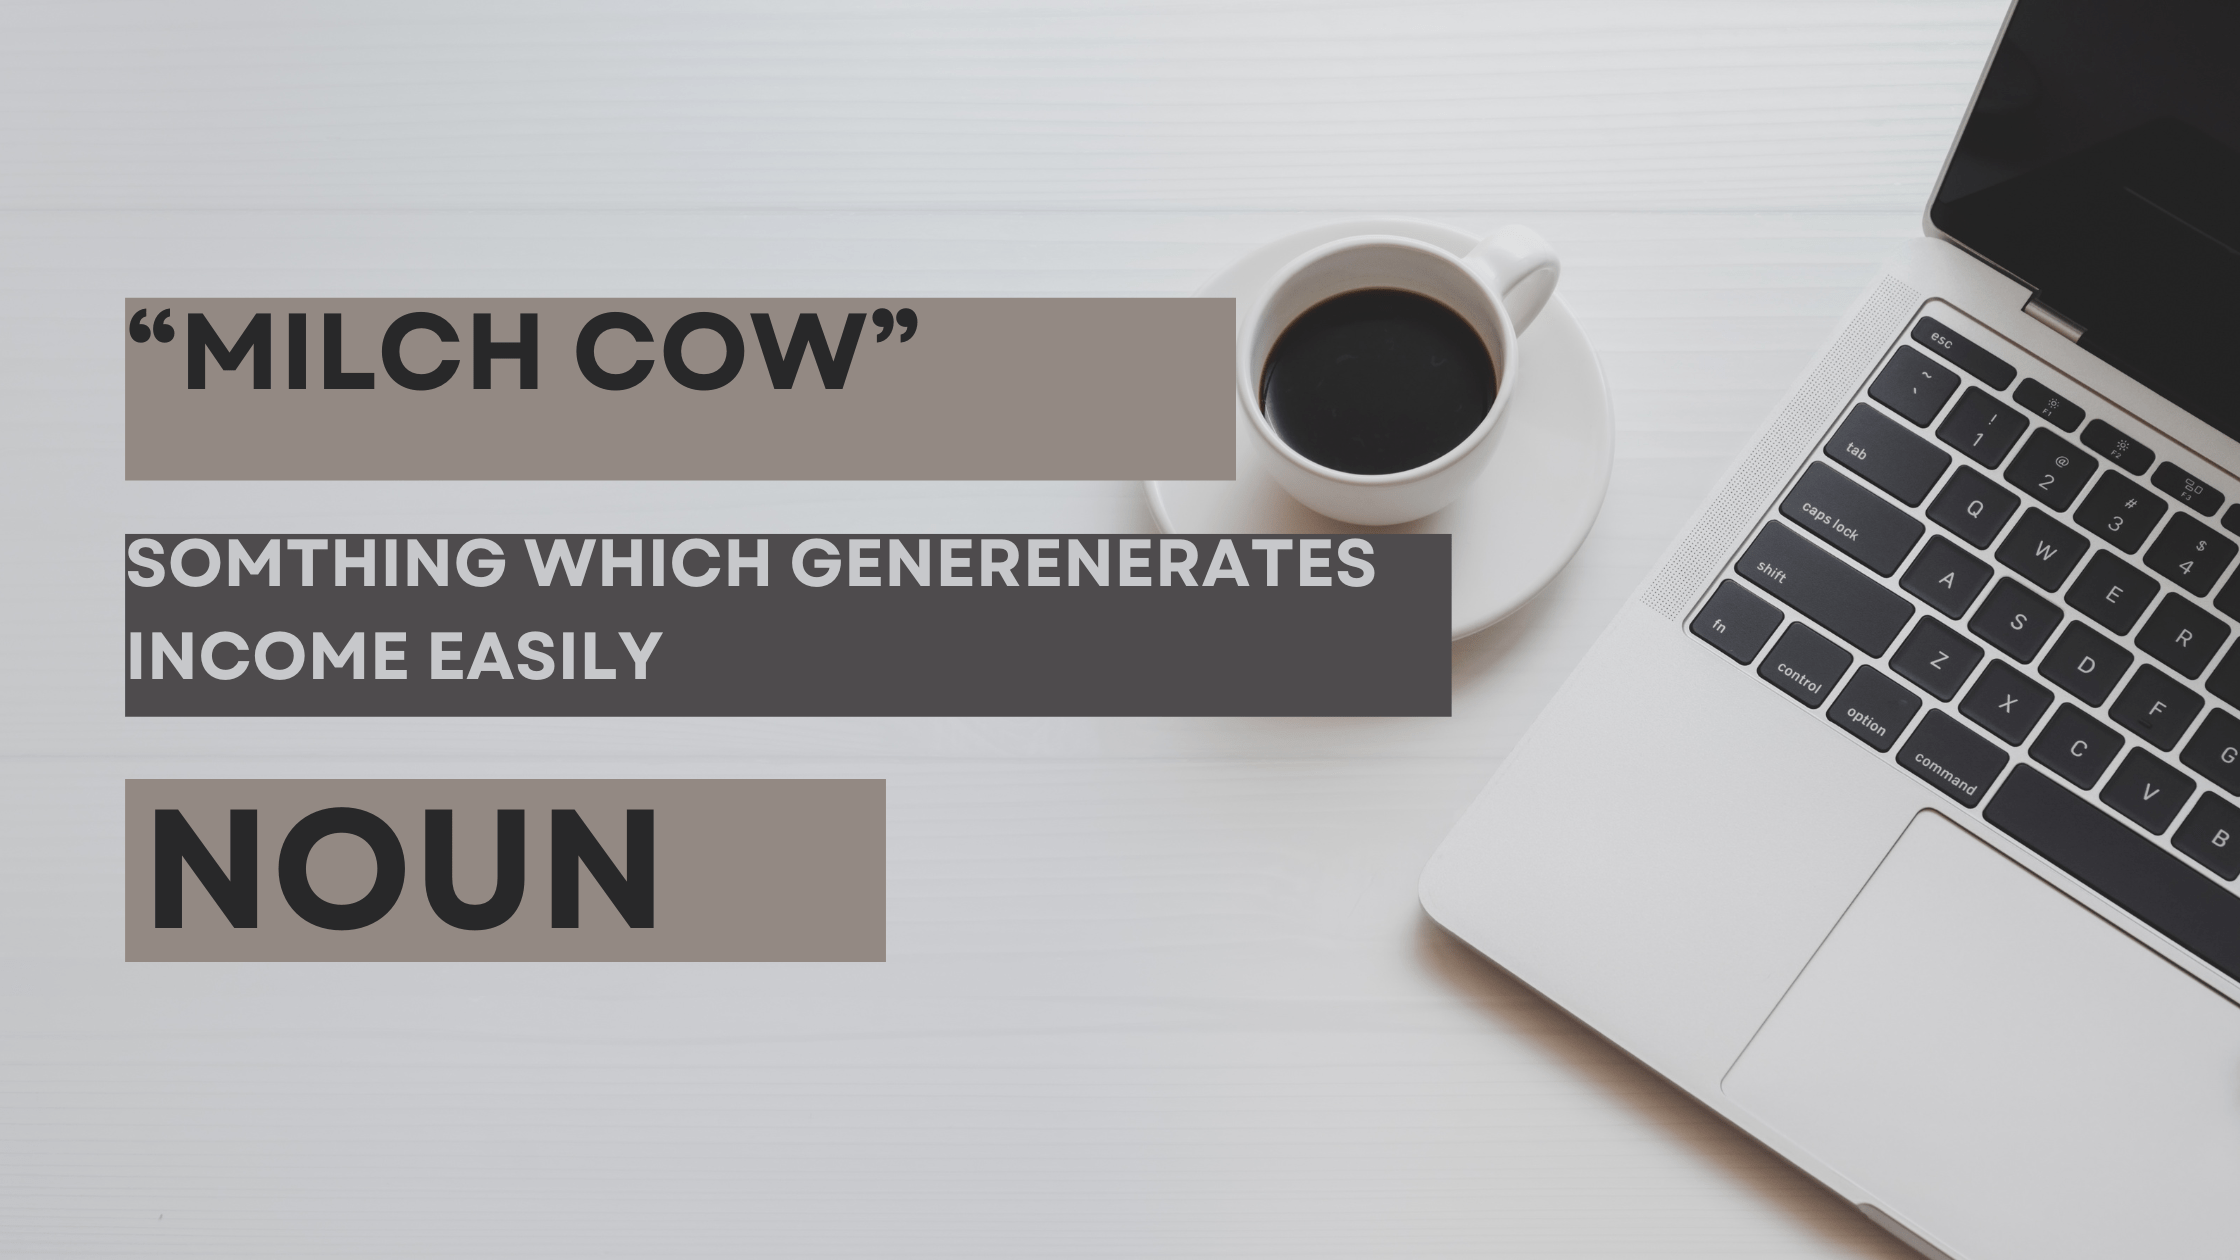 Every details about milchcow compound word